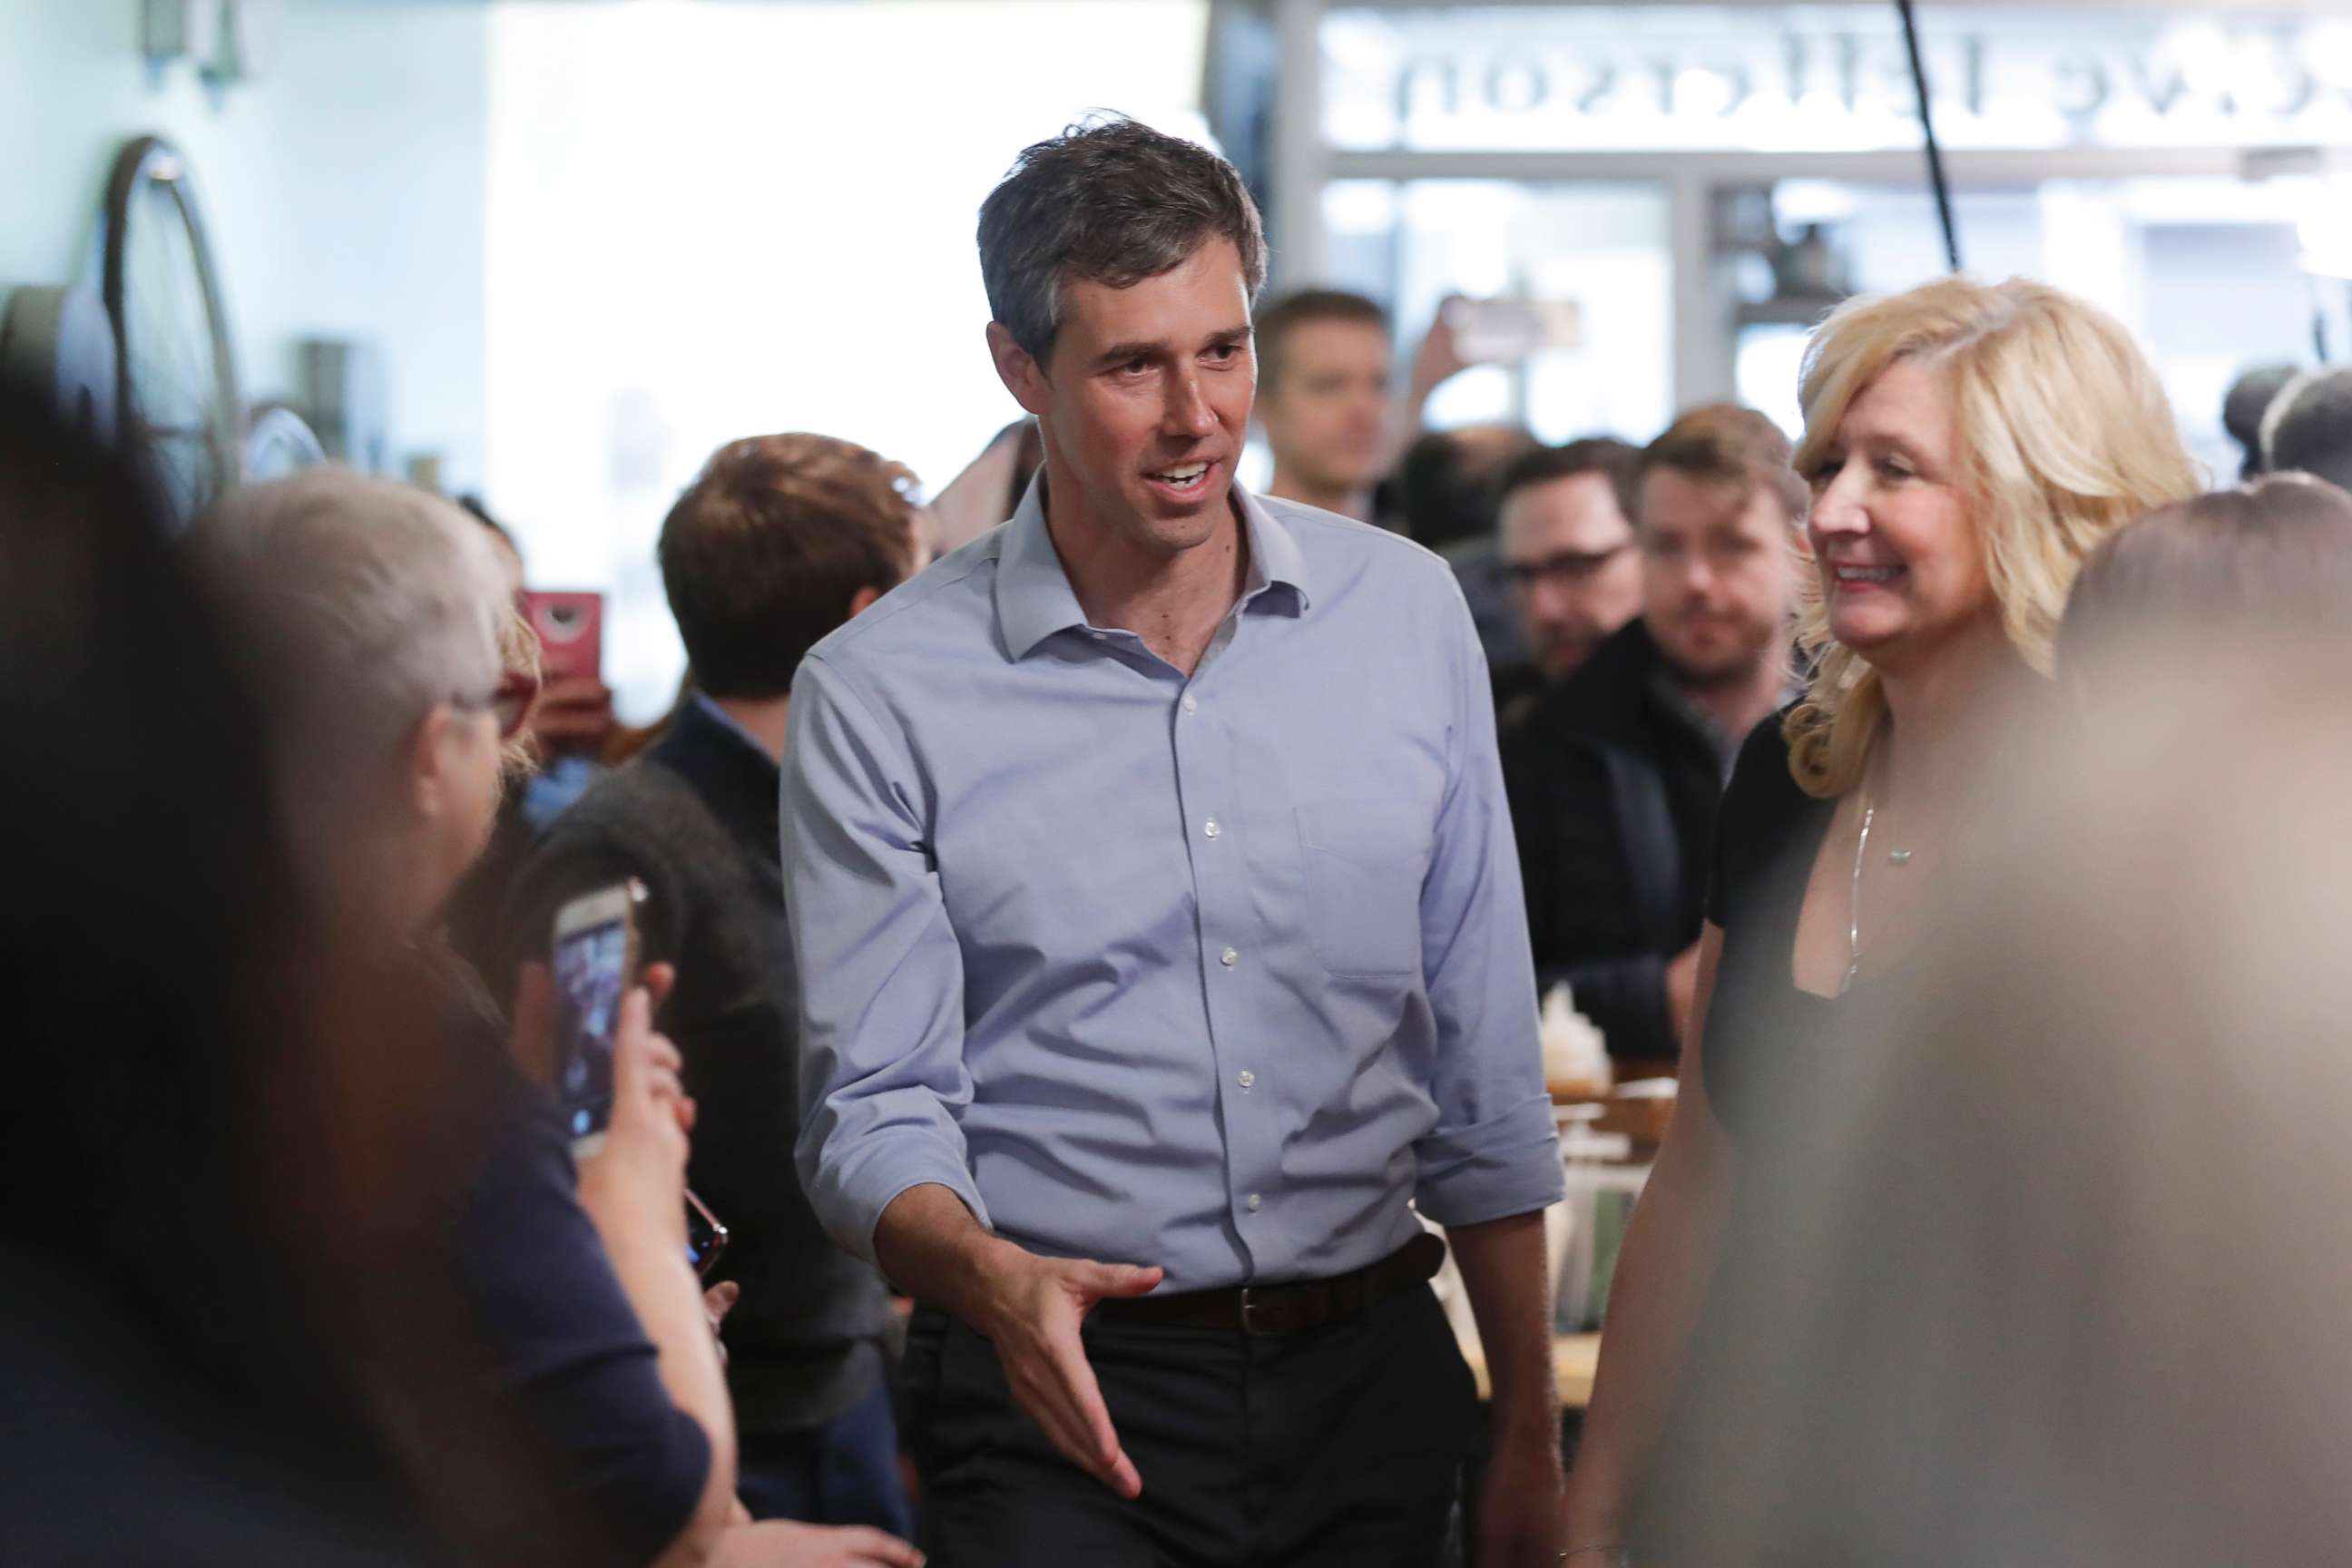 PHOTO: Former Texas congressman Beto O'Rourke greets employees before speaking at a meet and greet at the Beancounter Coffeehouse & Drinkery, March 14, 2019, in Burlington, Iowa.